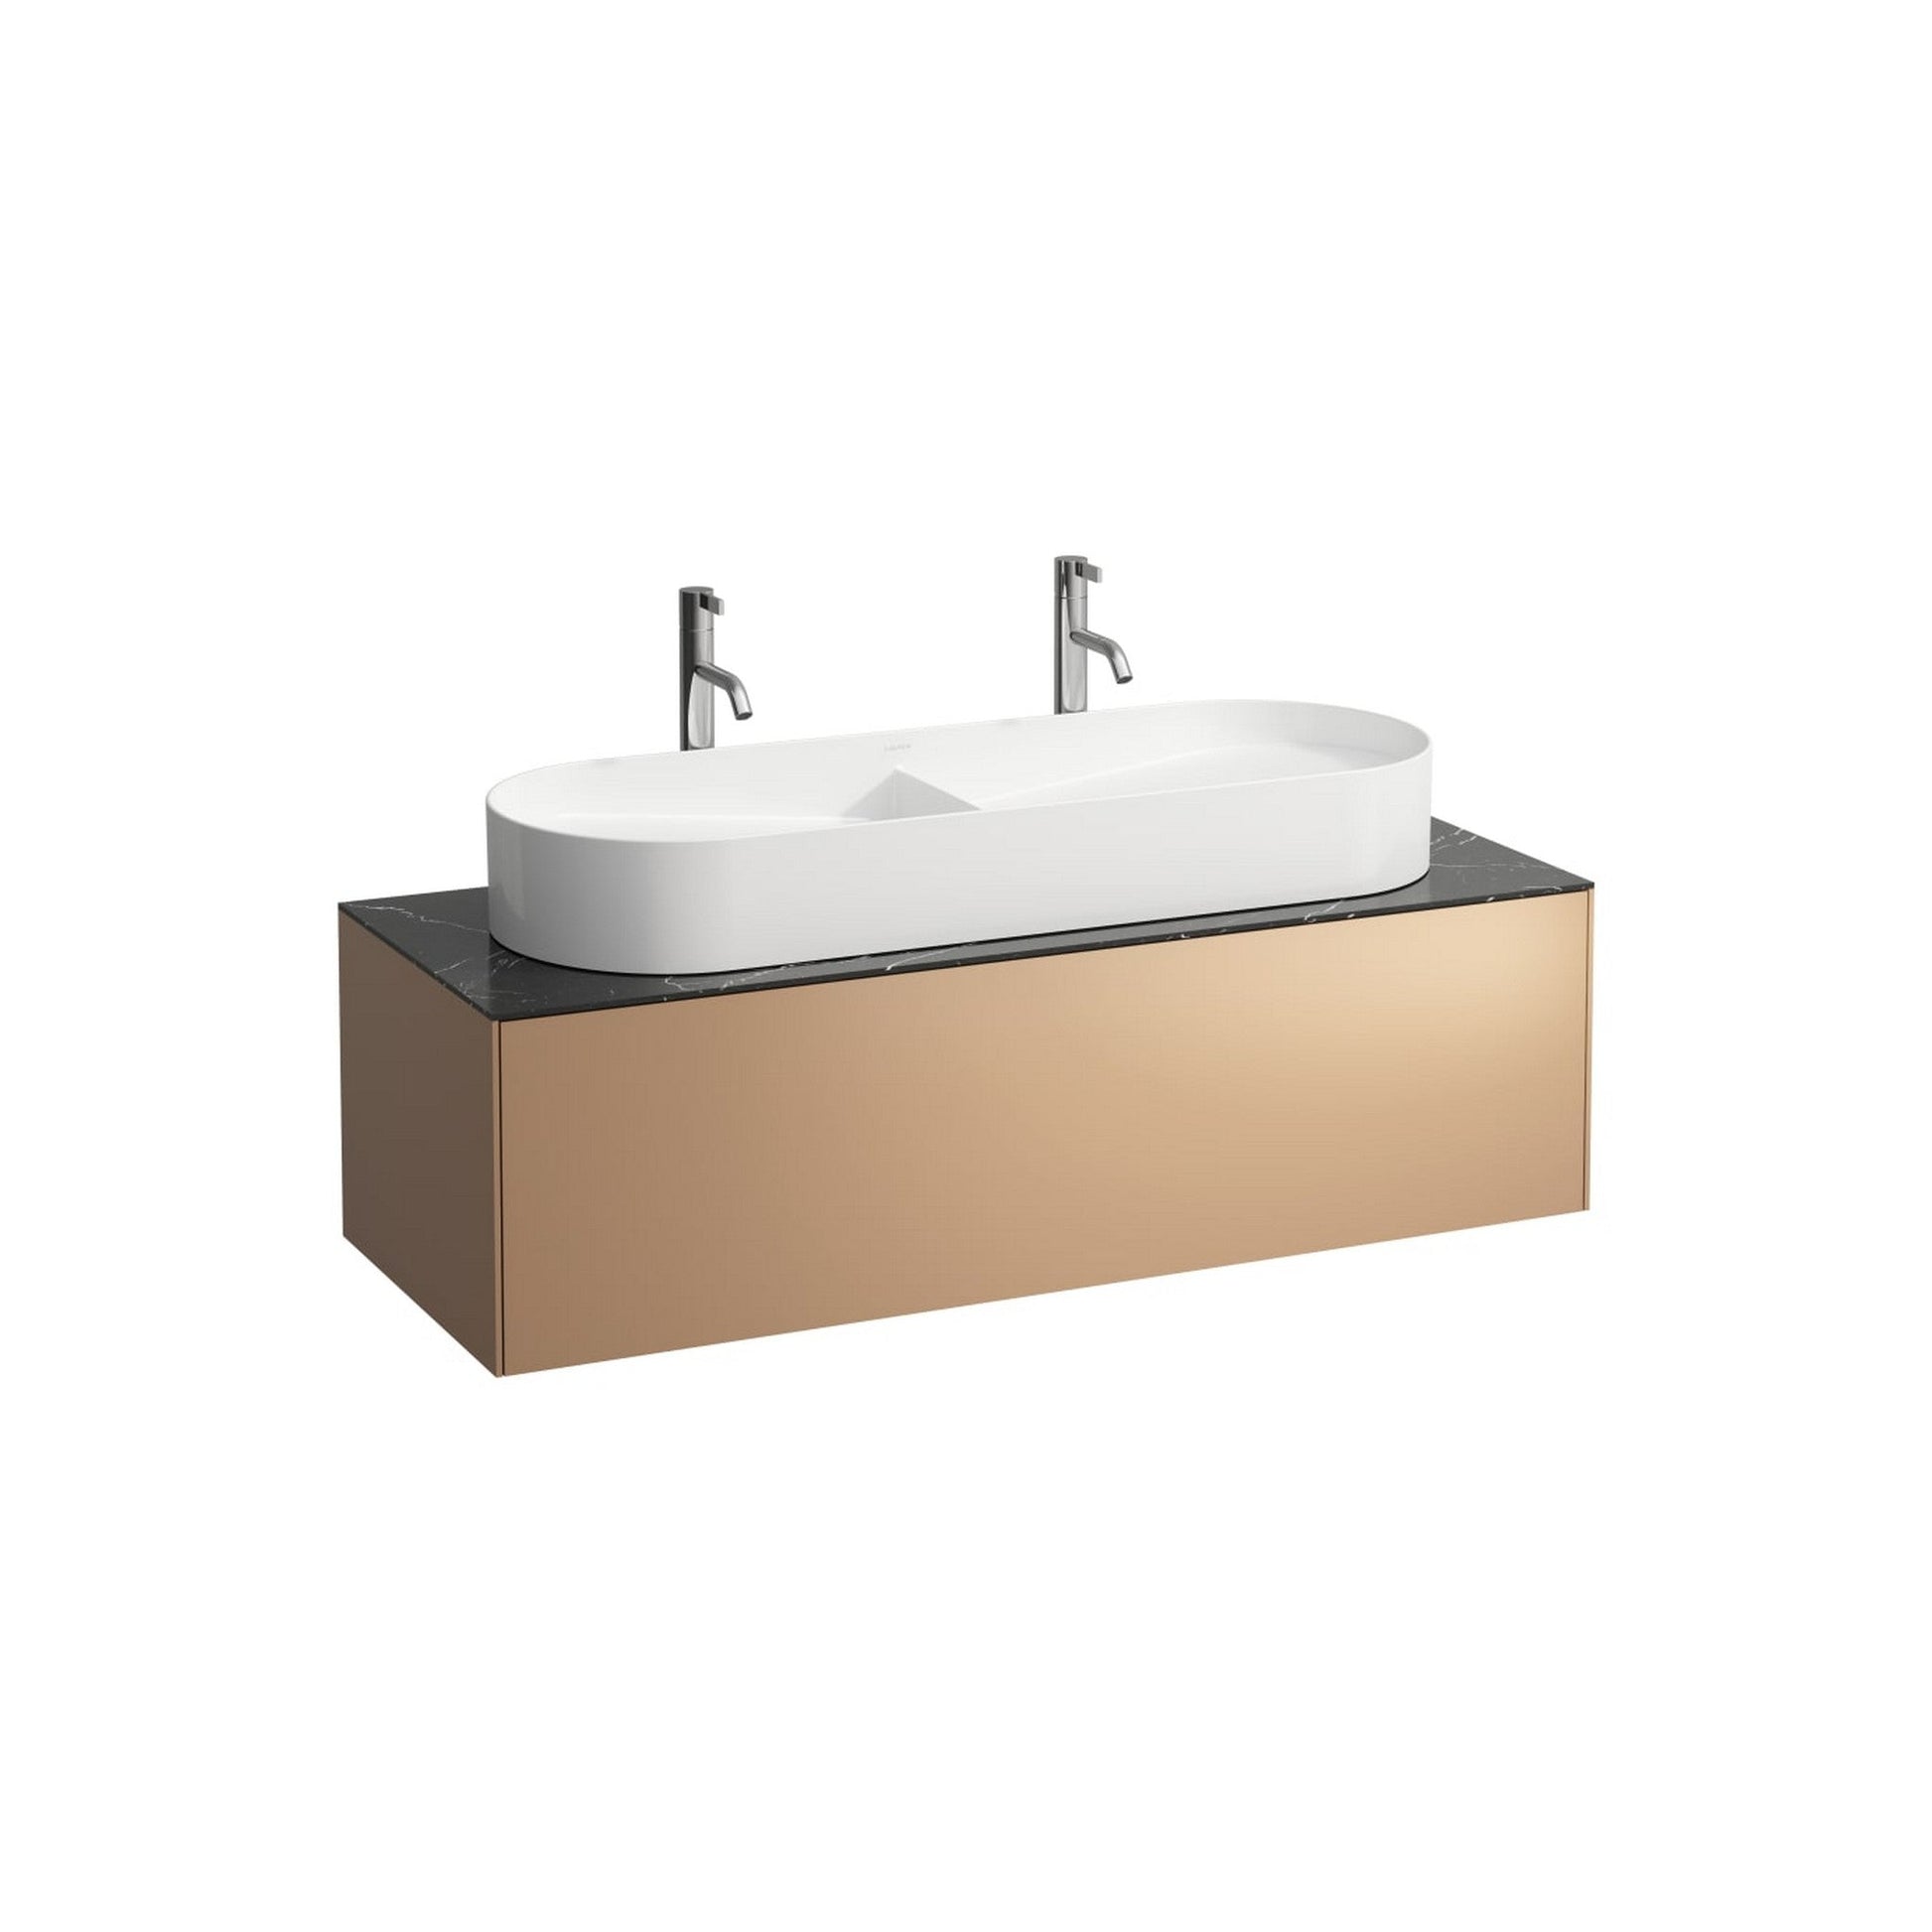 Laufen Sonar 46" 1-Drawer Copper Wall-Mounted Vanity With Nero Marquina Marble Top, Center Sink Cut-out for Sonar Bathroom Sink Model: H812348, H812349